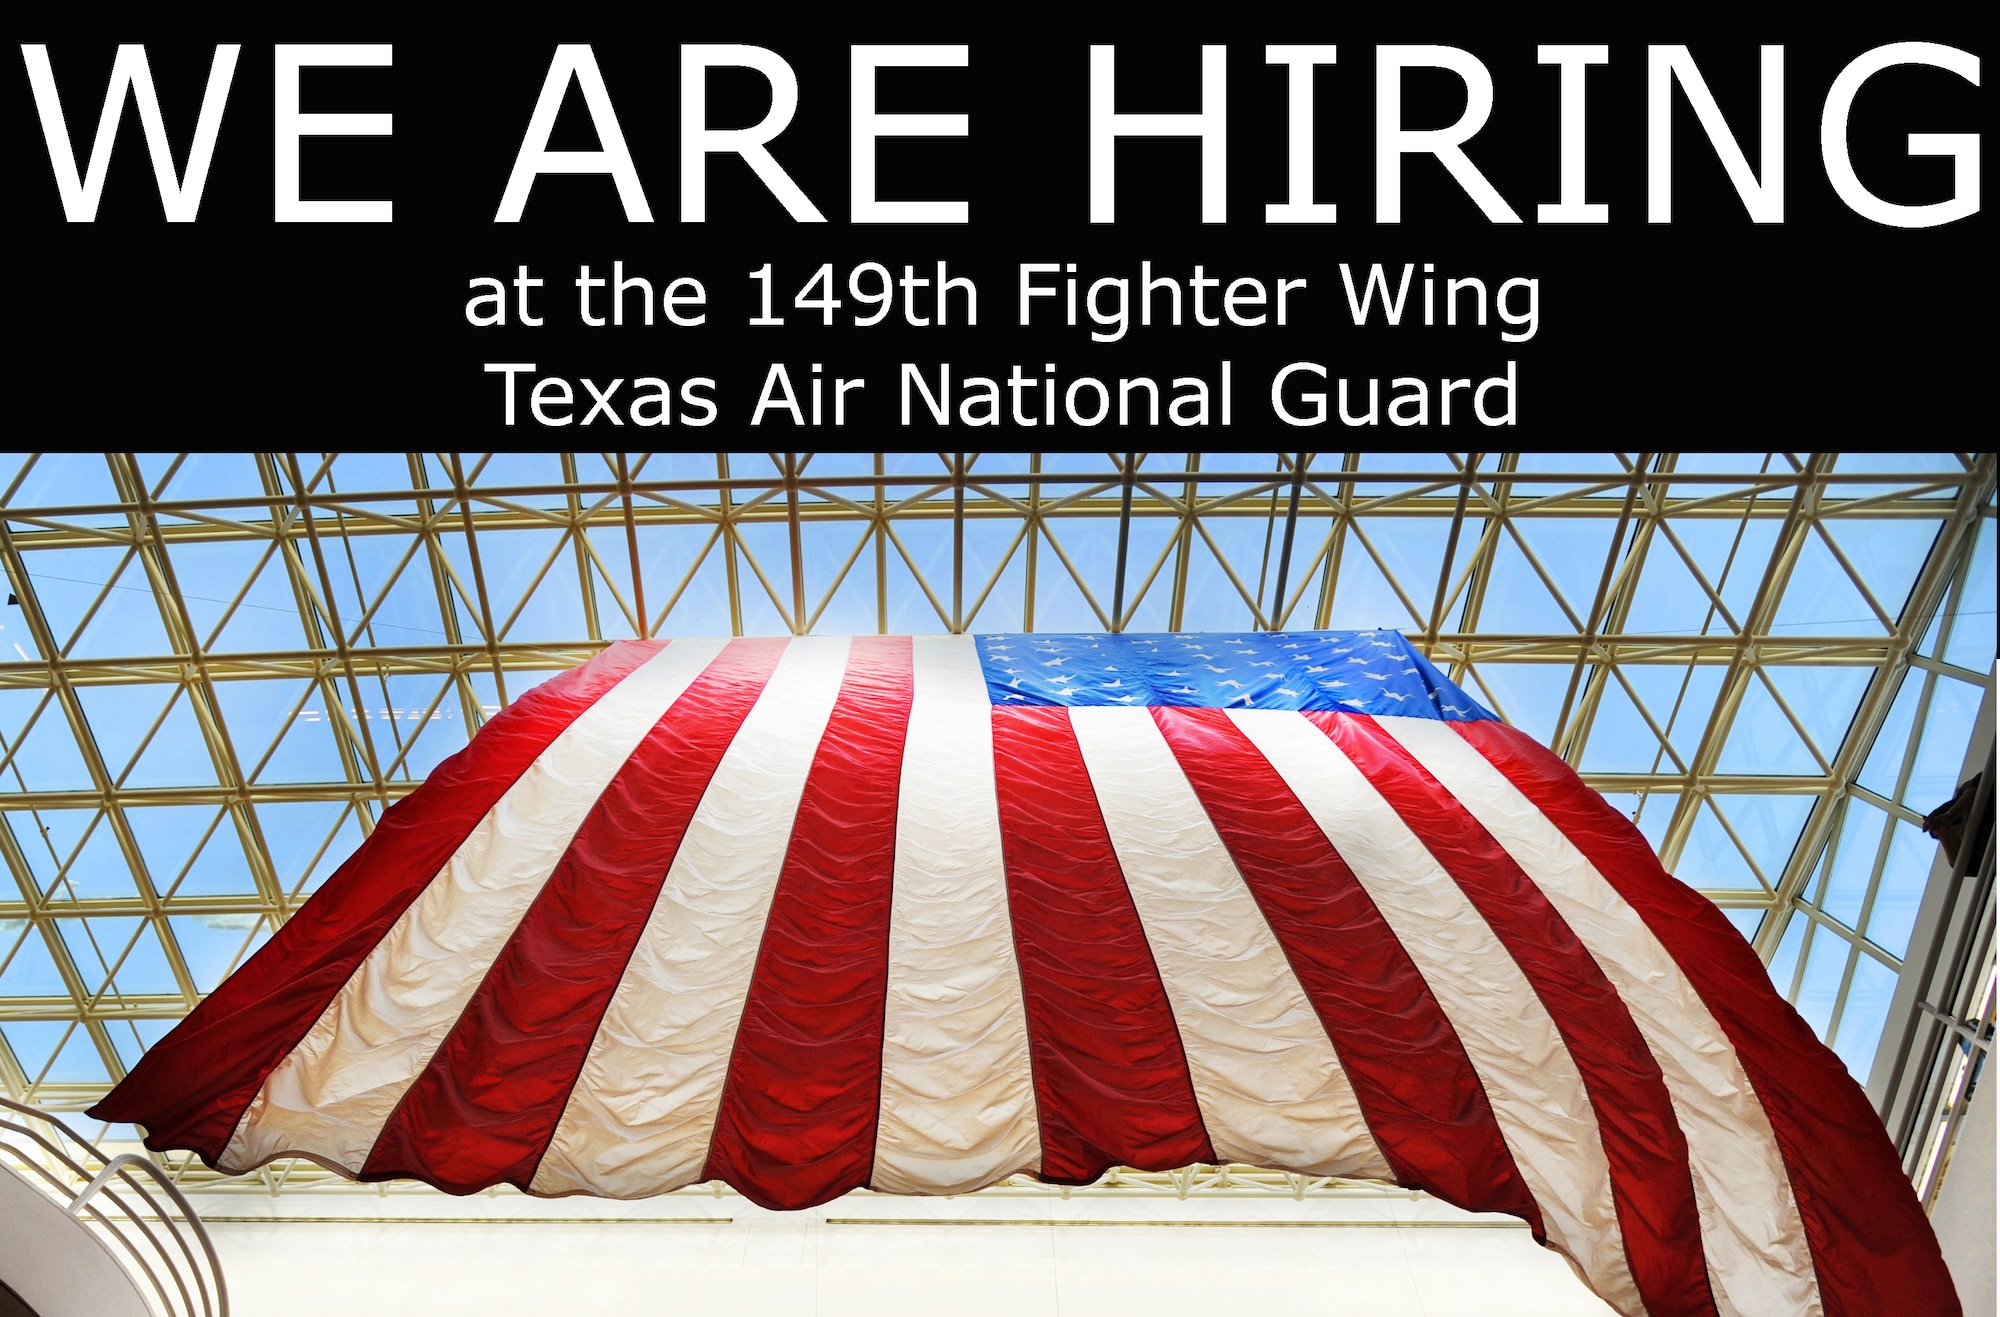 The 149th Fighter Wing is hiring!